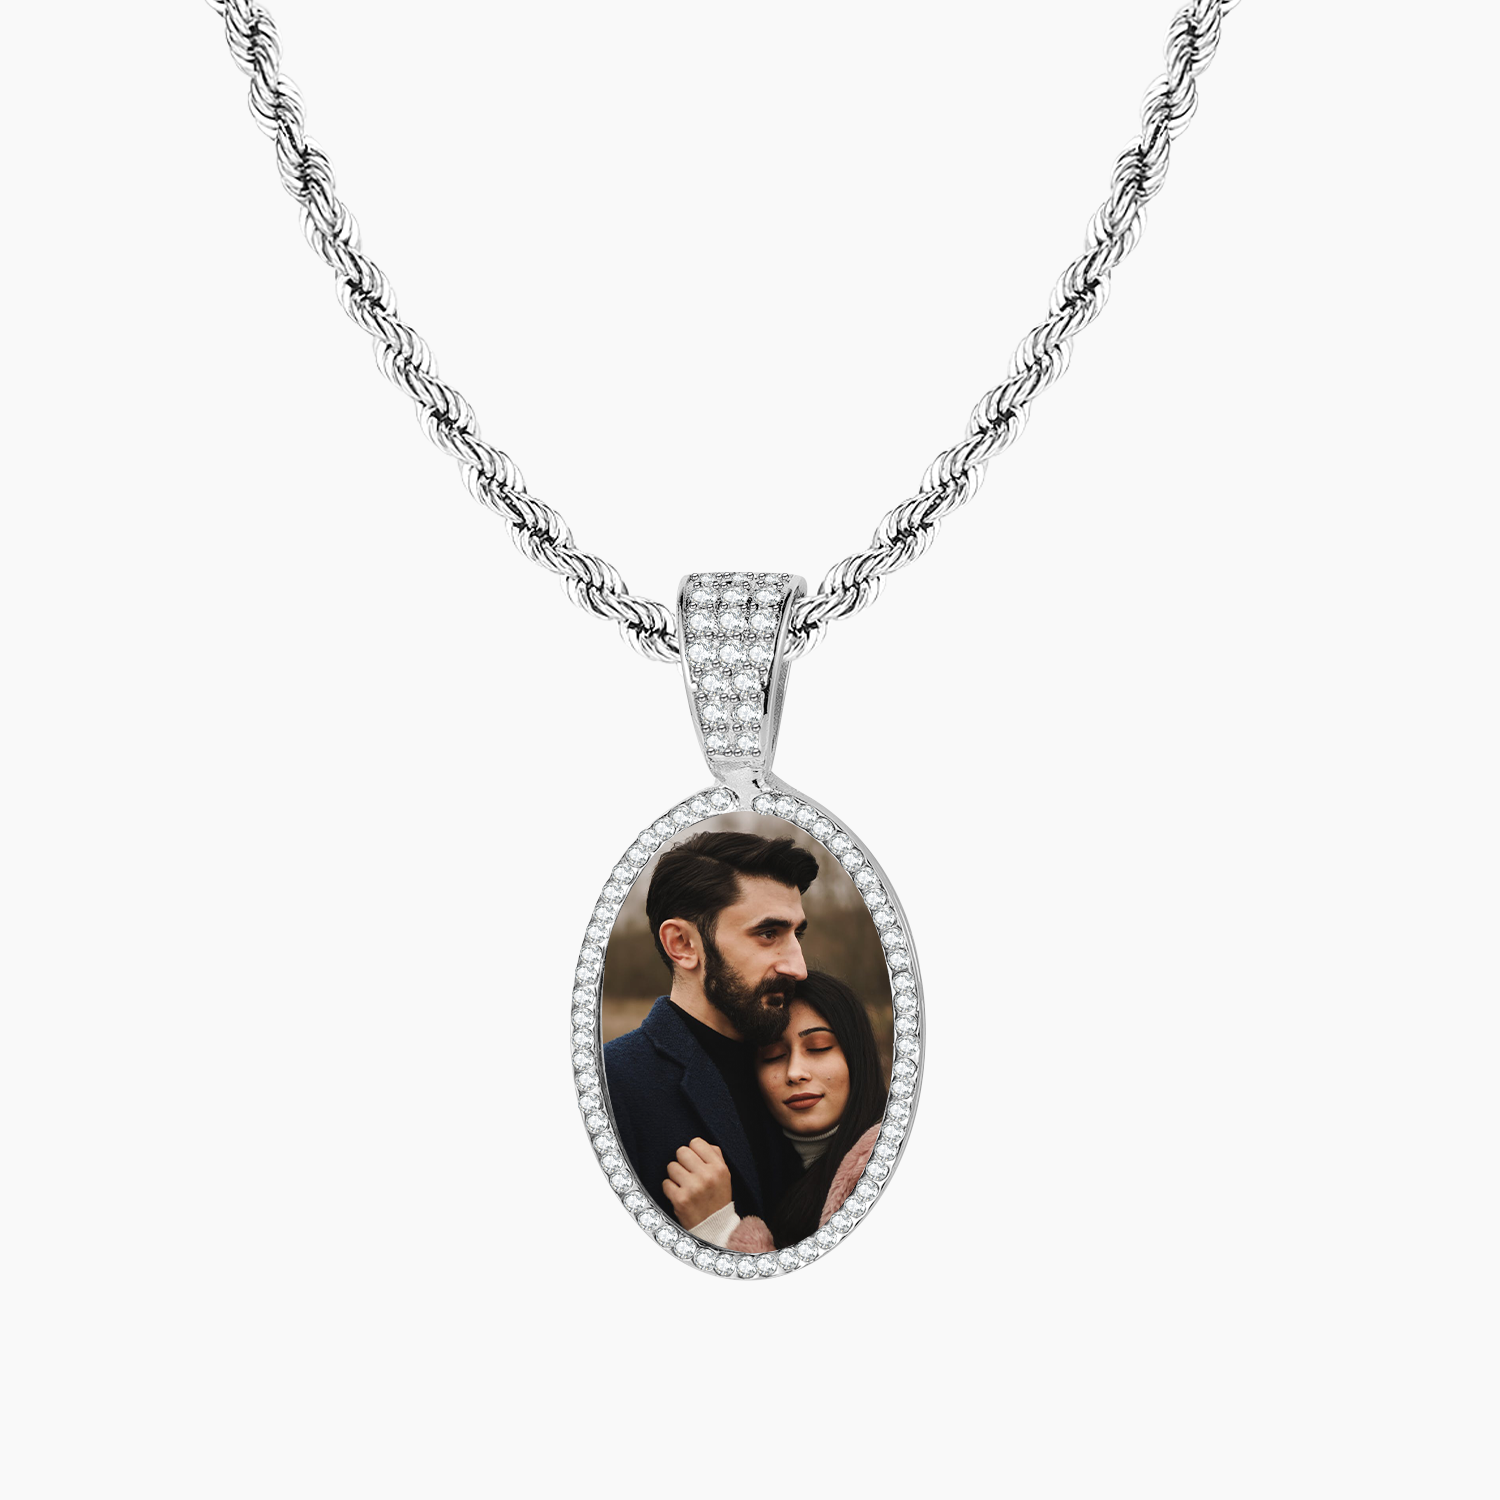 Necklace with Picture Inside - Julri Box